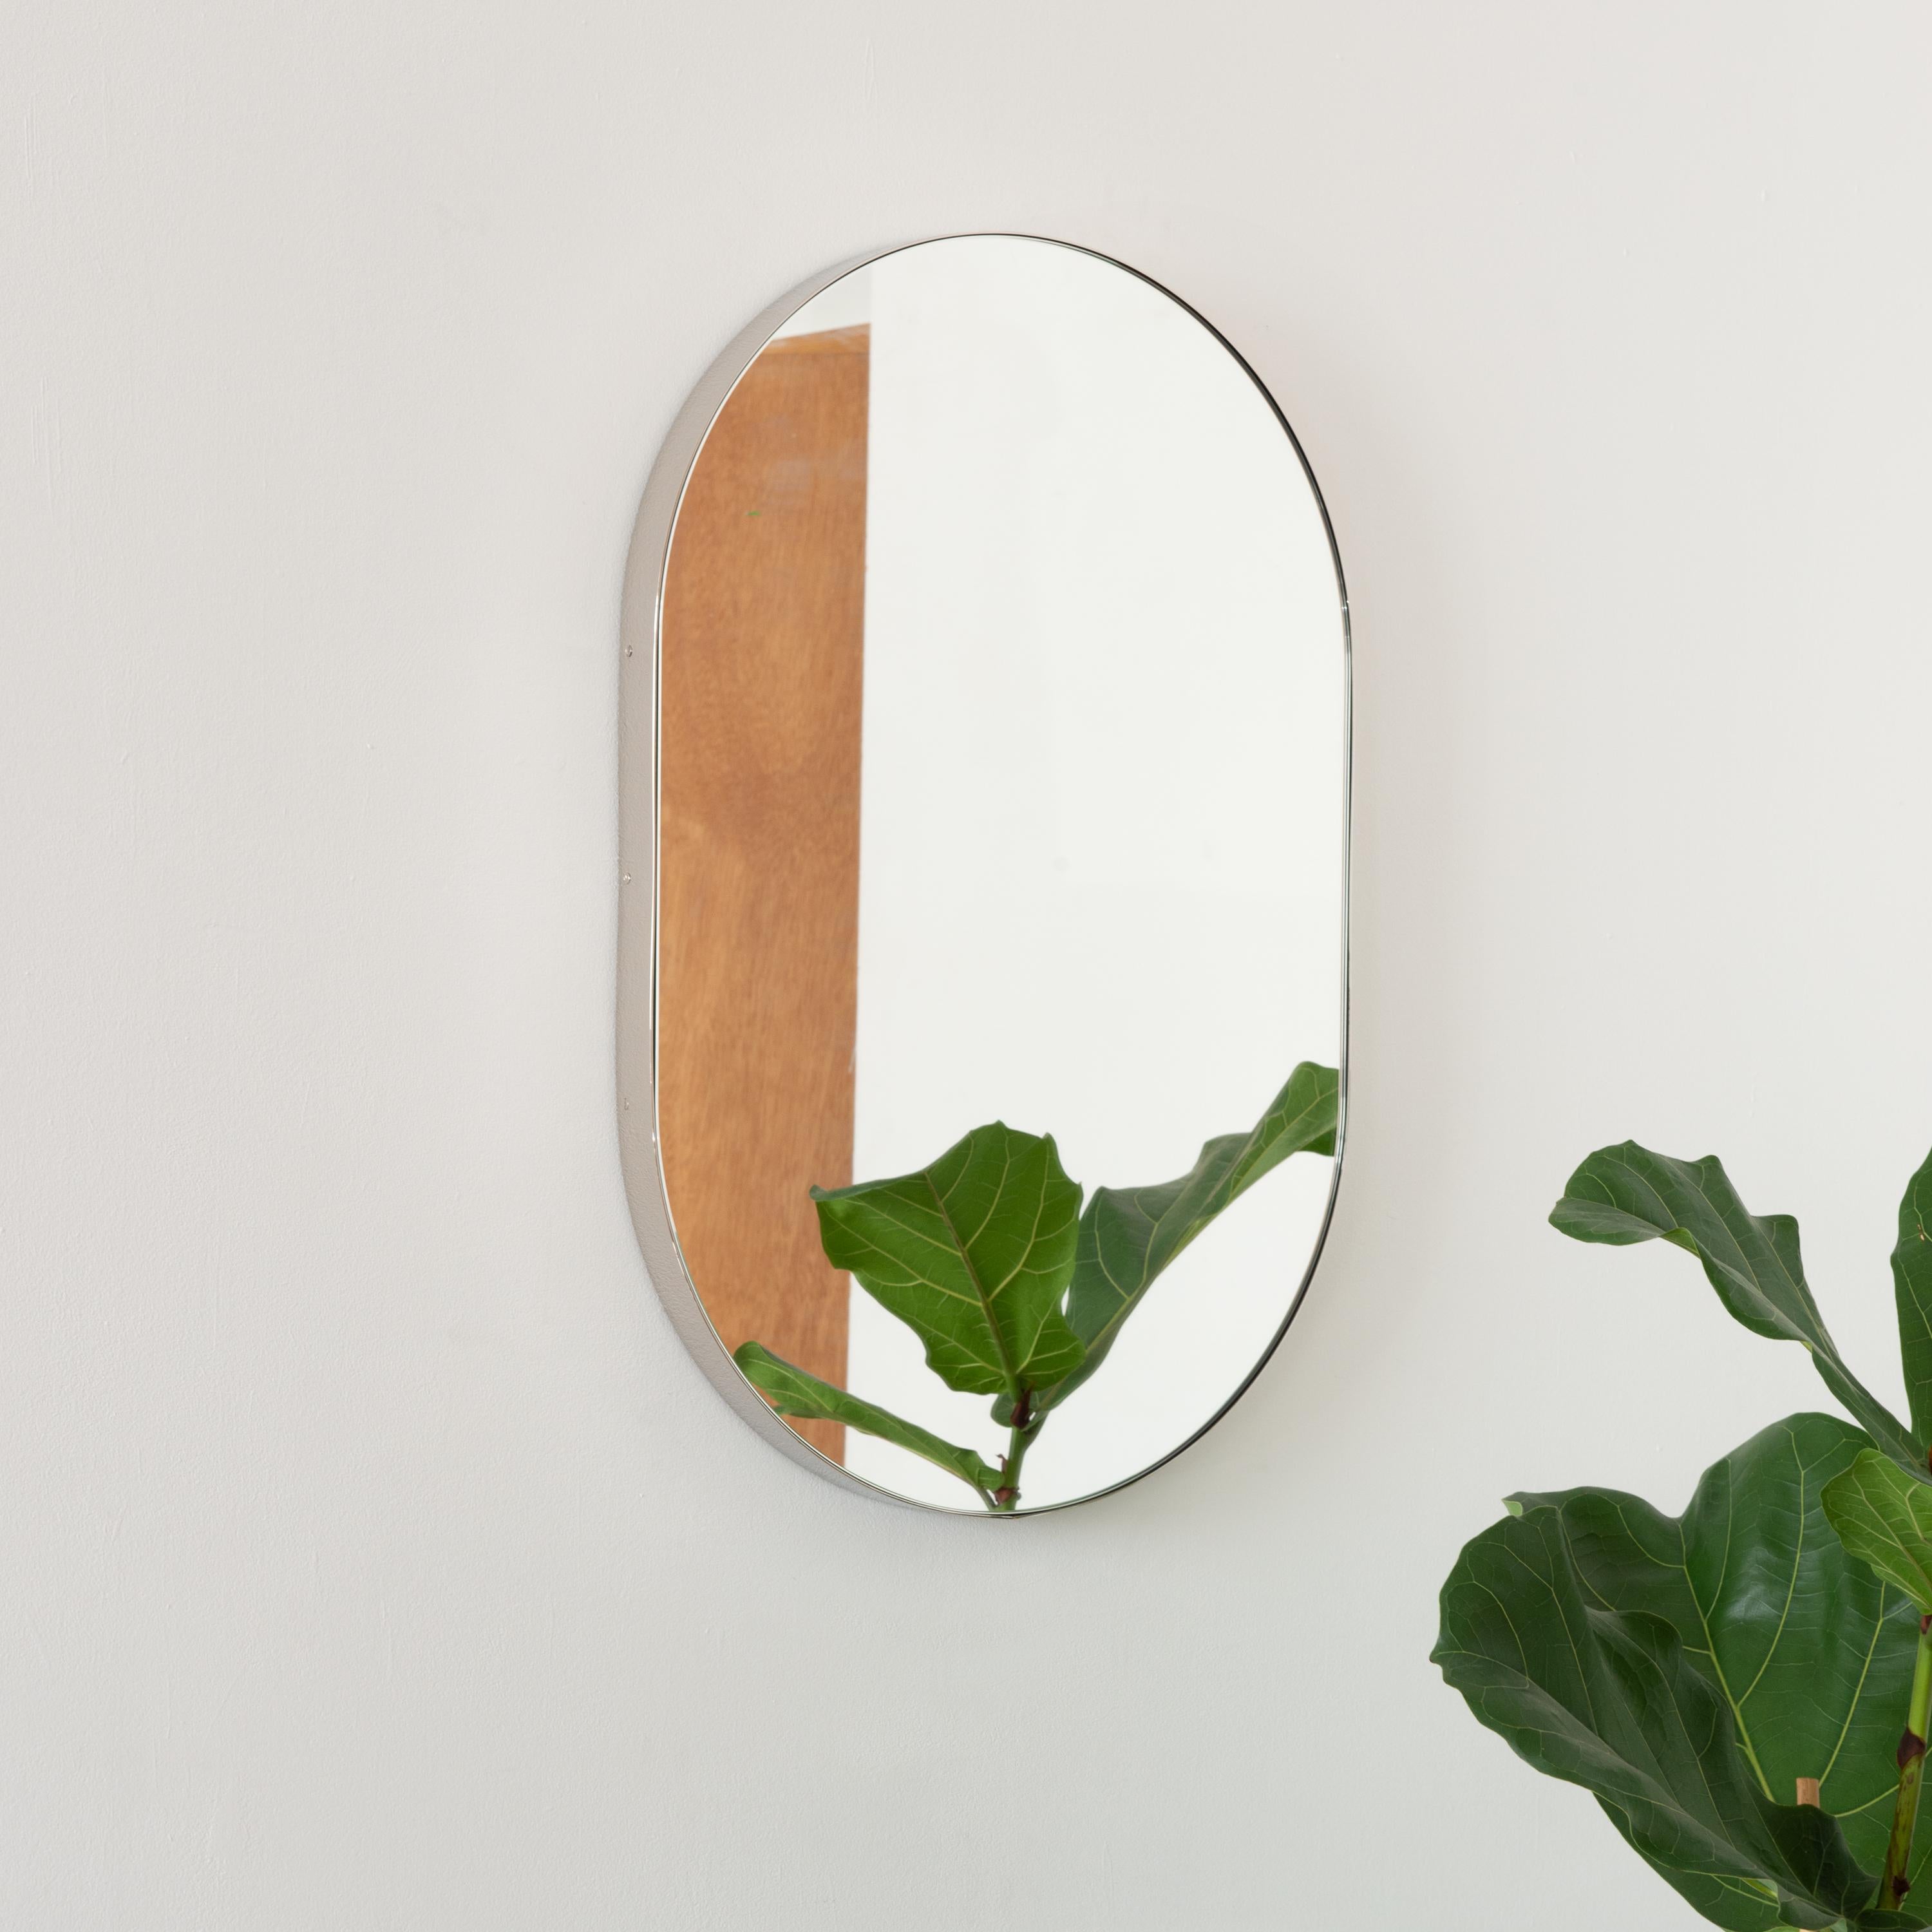 Delightful capsule shaped mirror with an elegant nickel plated frame. Designed and handcrafted in London, UK.

Fitted with a brass hook or an aluminium z-bar depending on the size of the mirror. Also available on demand with a split batten system to